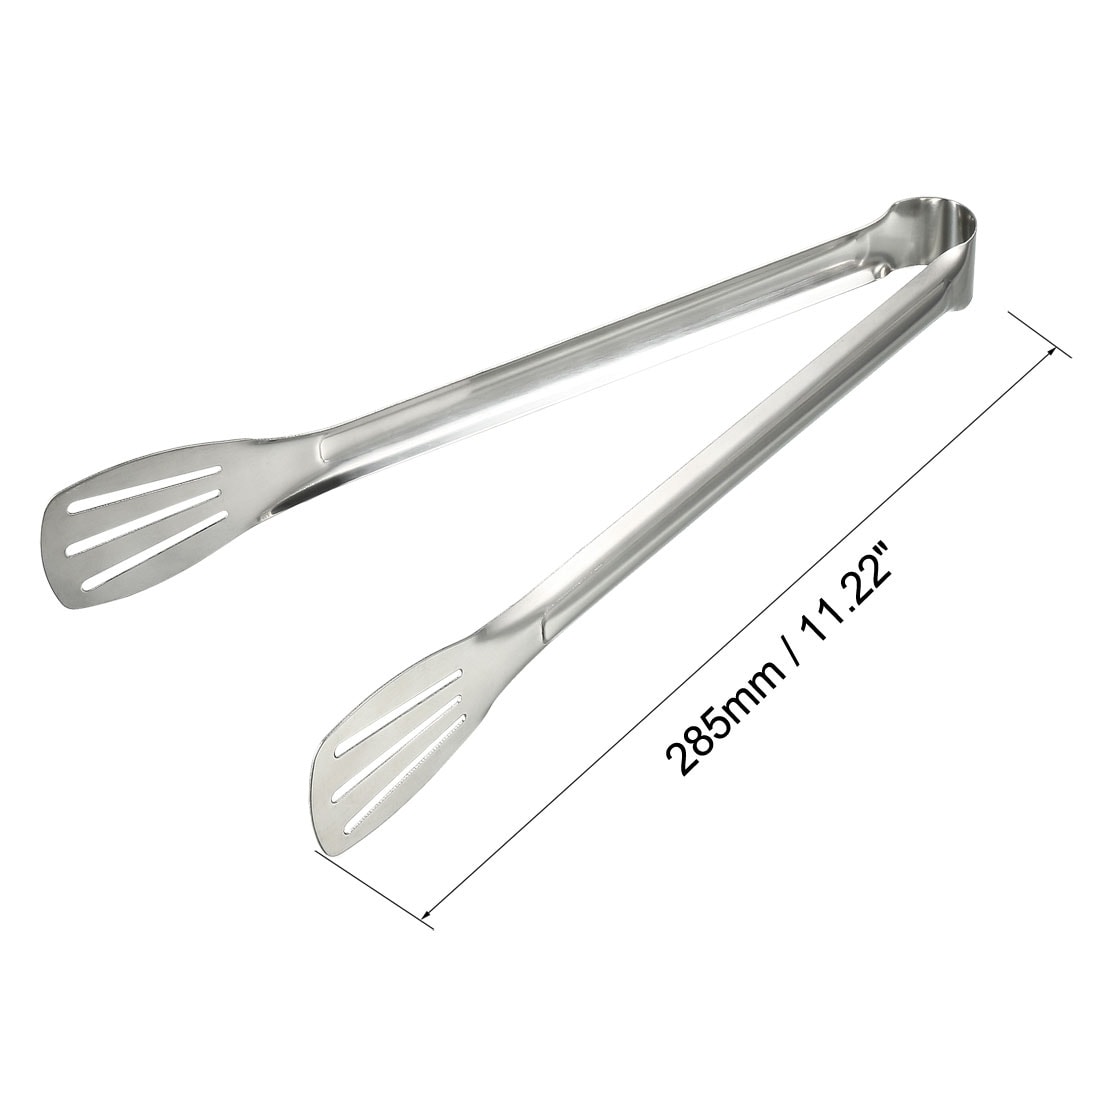 Food Grade Stainless Steel Kitchen Tongs For Cooking,bbq - 7 9 And 12  Inch,set Of 3 Heavy Duty Locking Metal Food Tongs Non-slip Grip